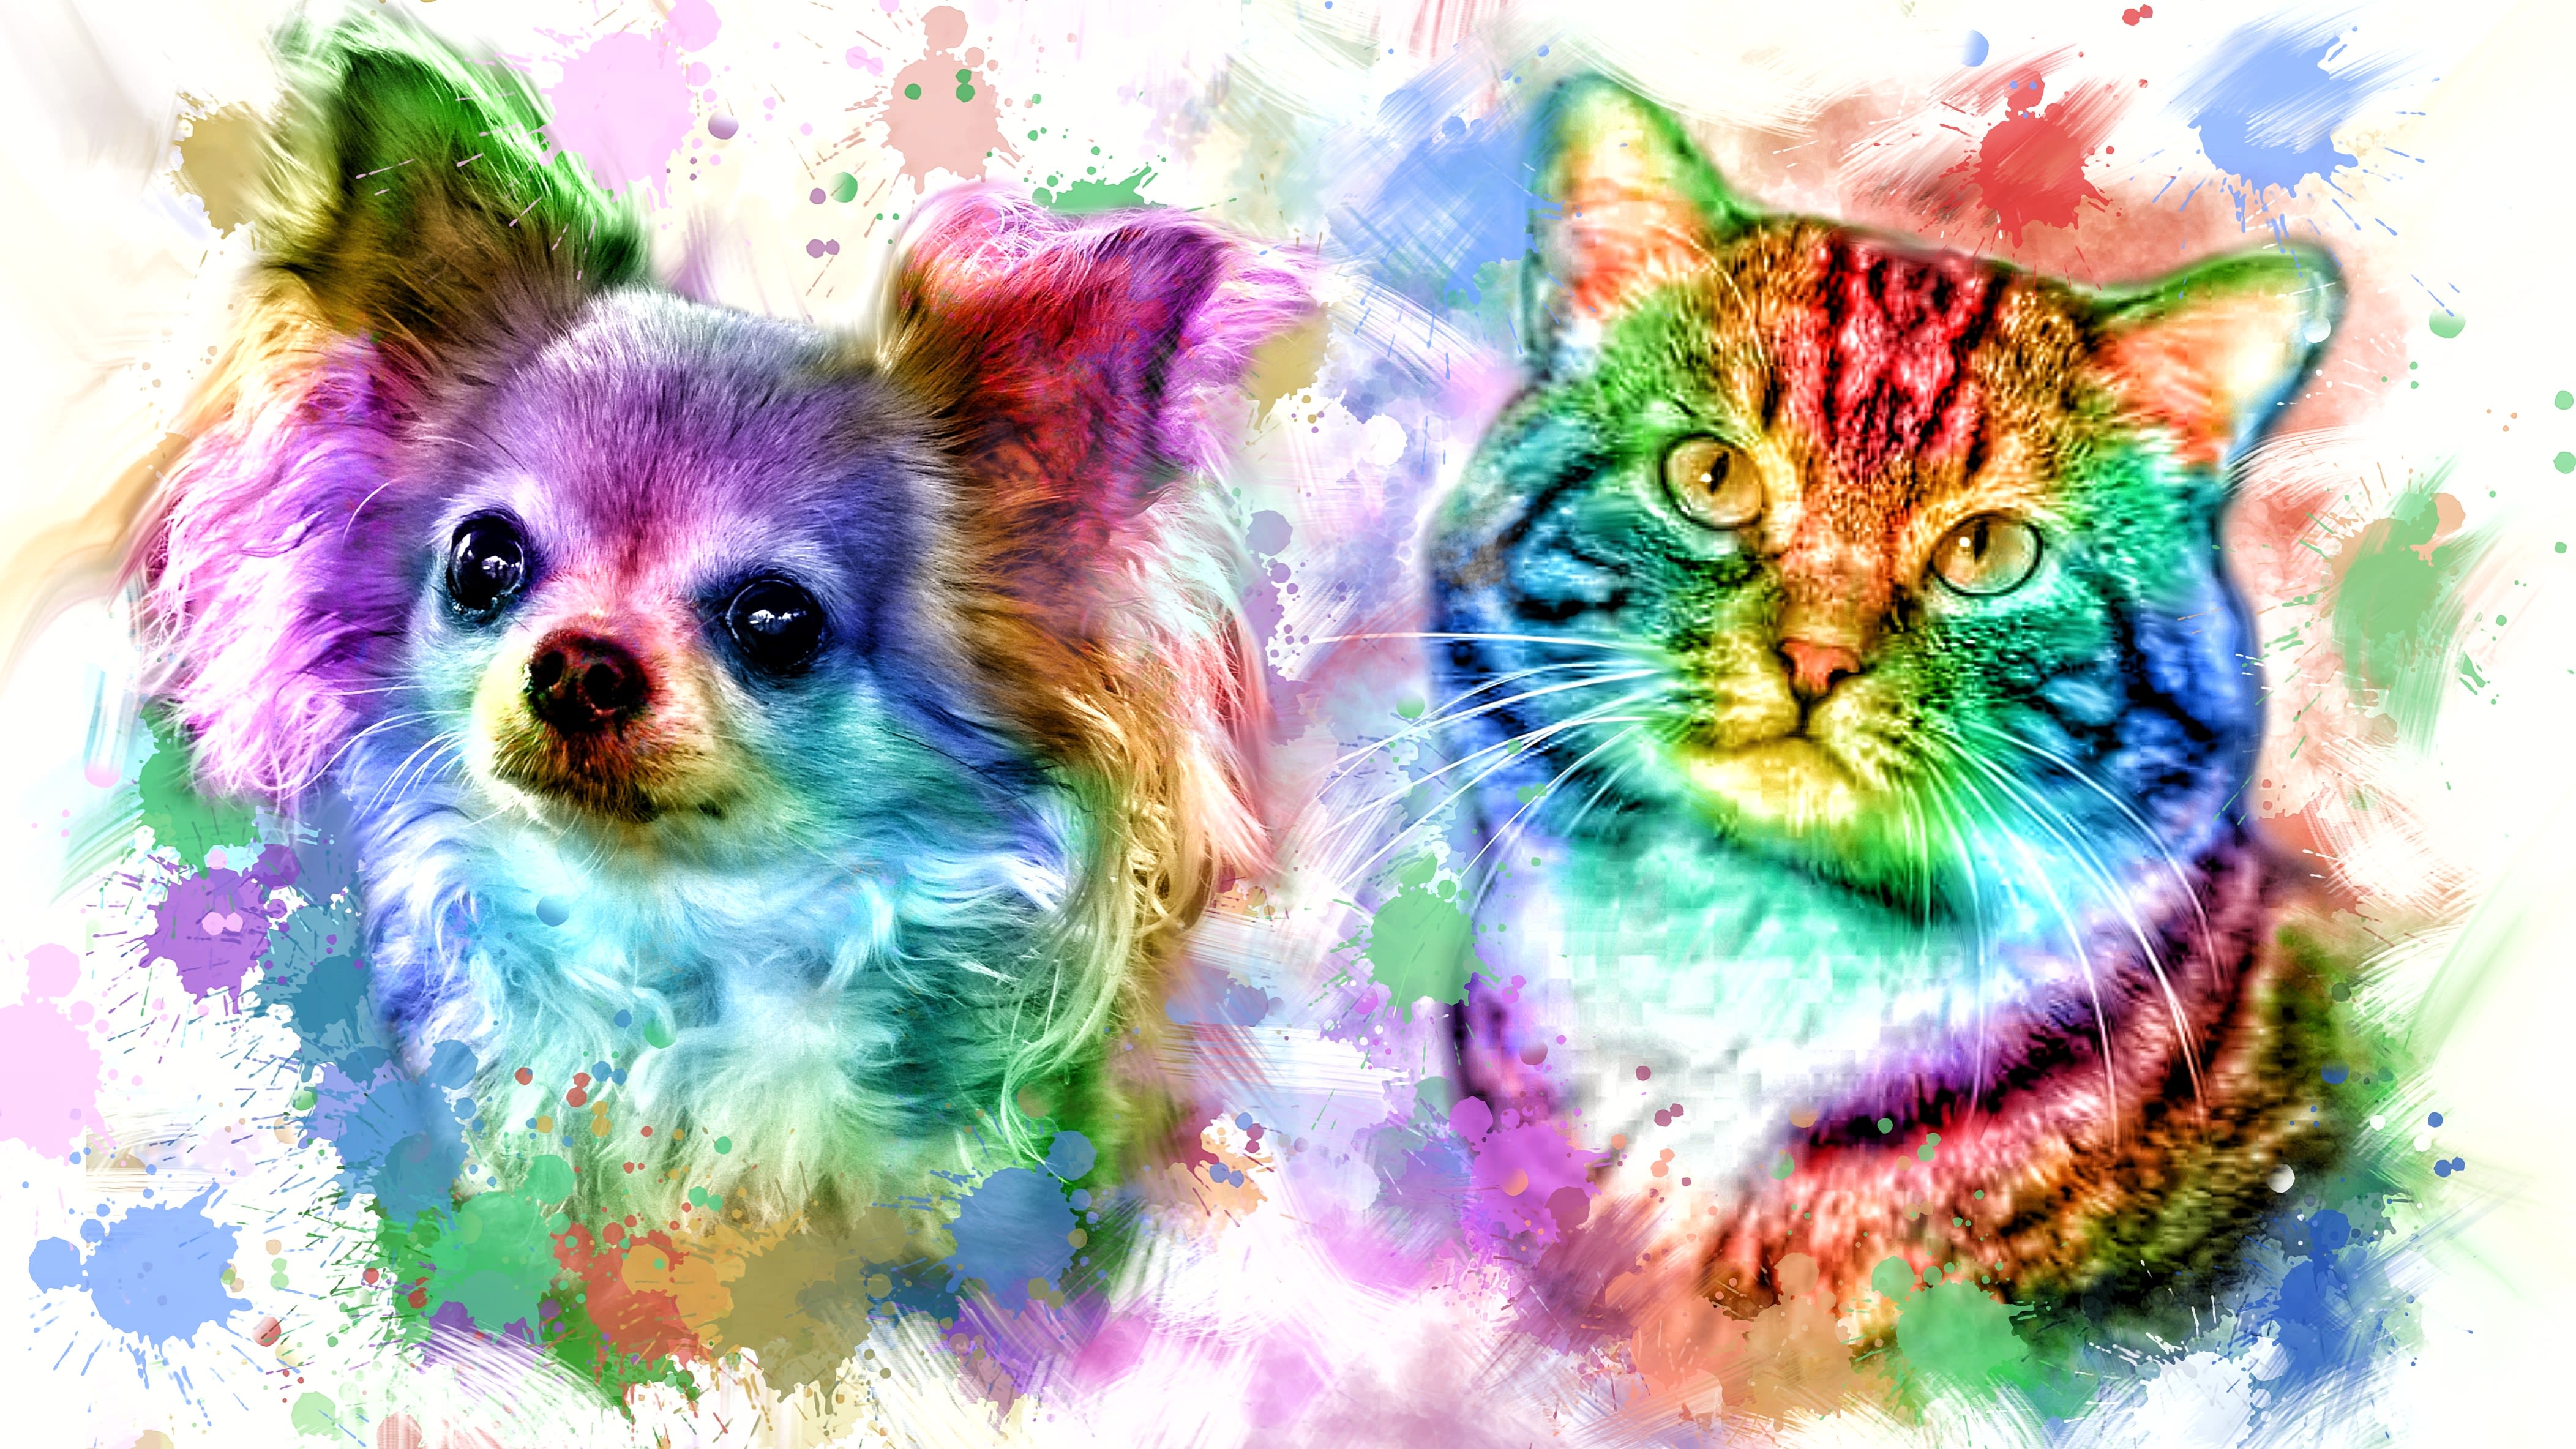 Draw cute animal and pet portrait in rainbow style by Uriefmaulana ...